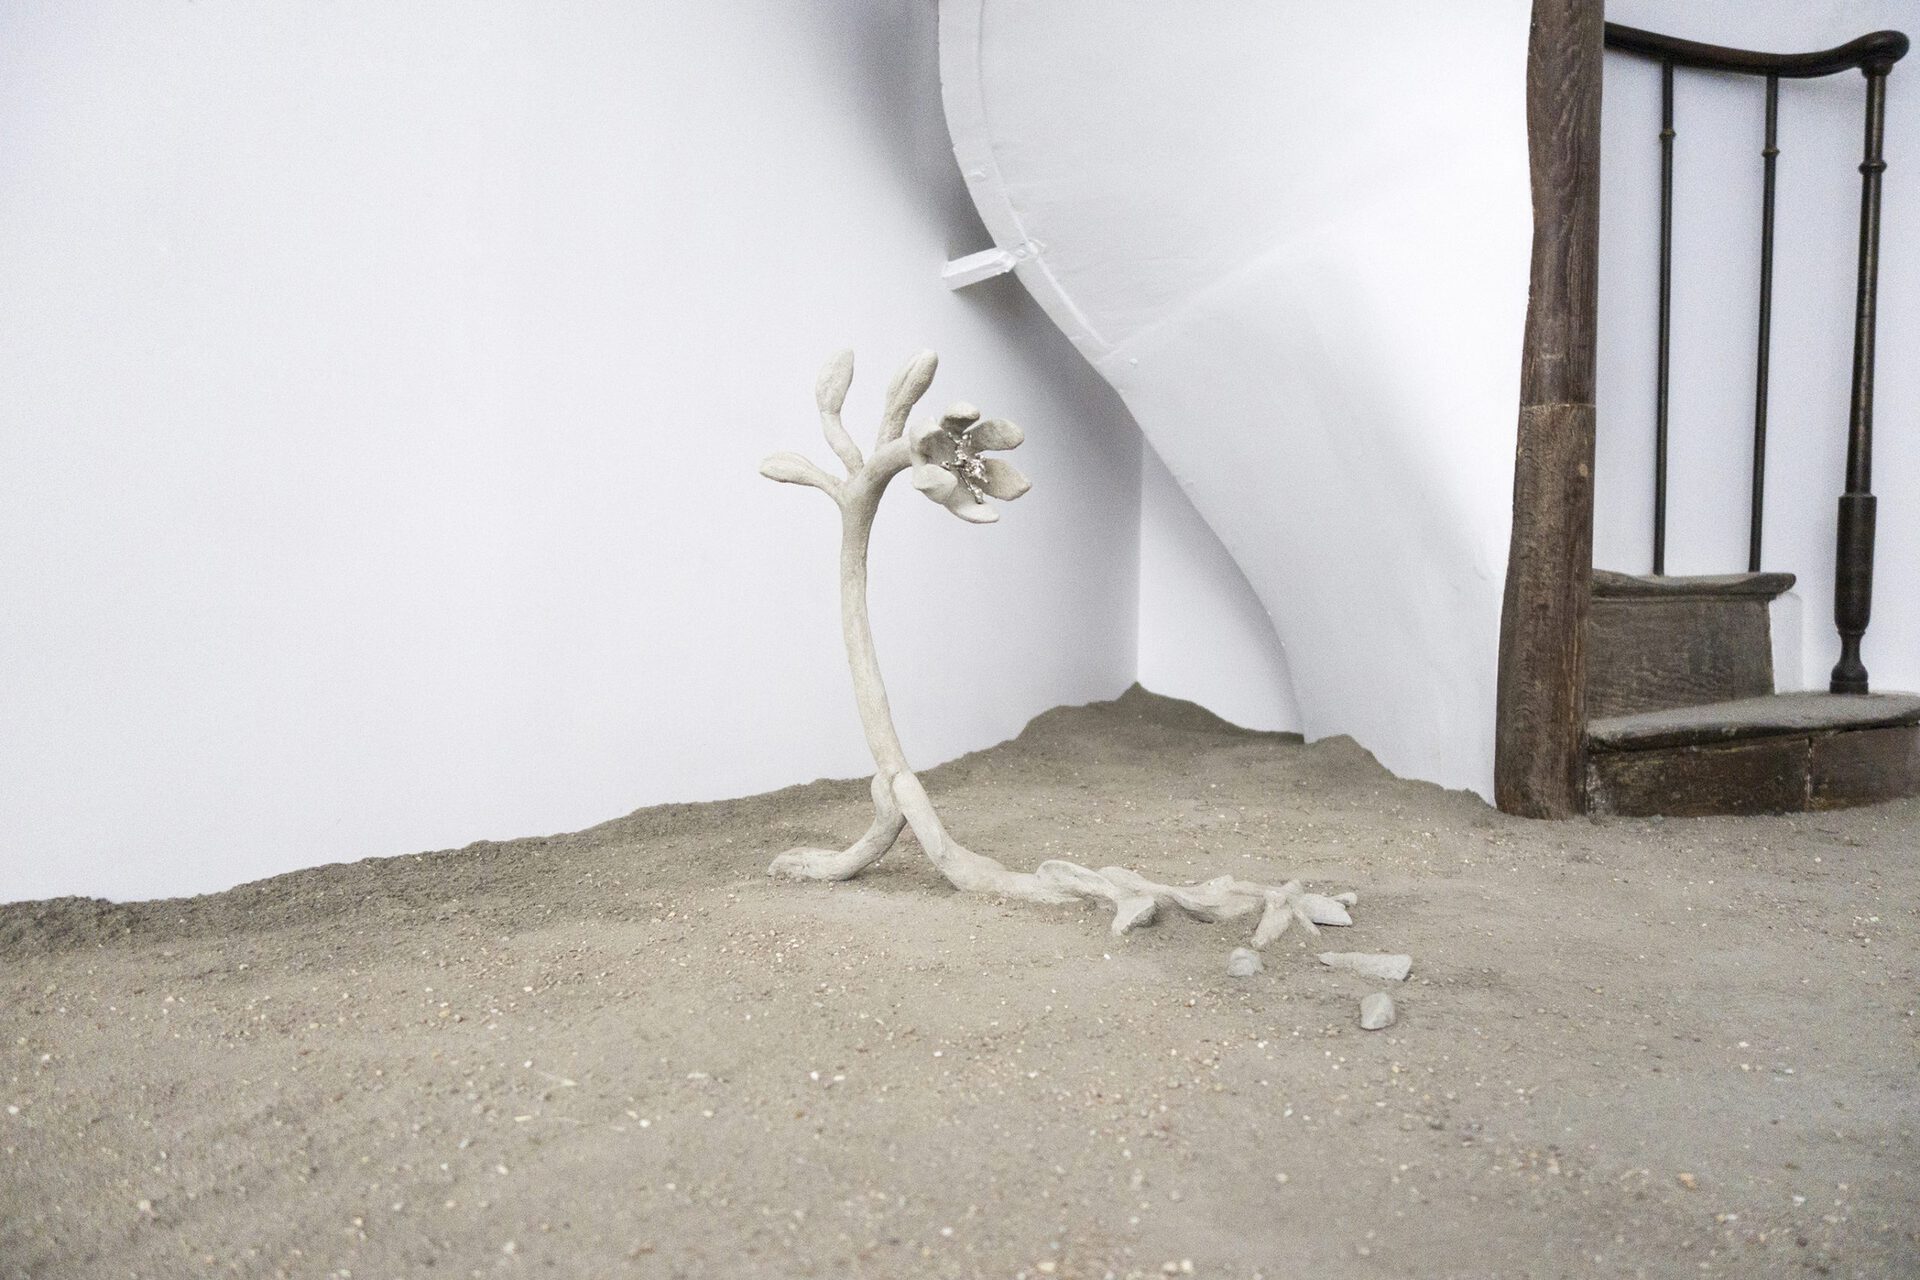 Sprouting Flower, 2021, concrete, steel, tin, 30 x 46 x 50, Xolo Cuintle (Romy Texier and Valentin Vie Binet)